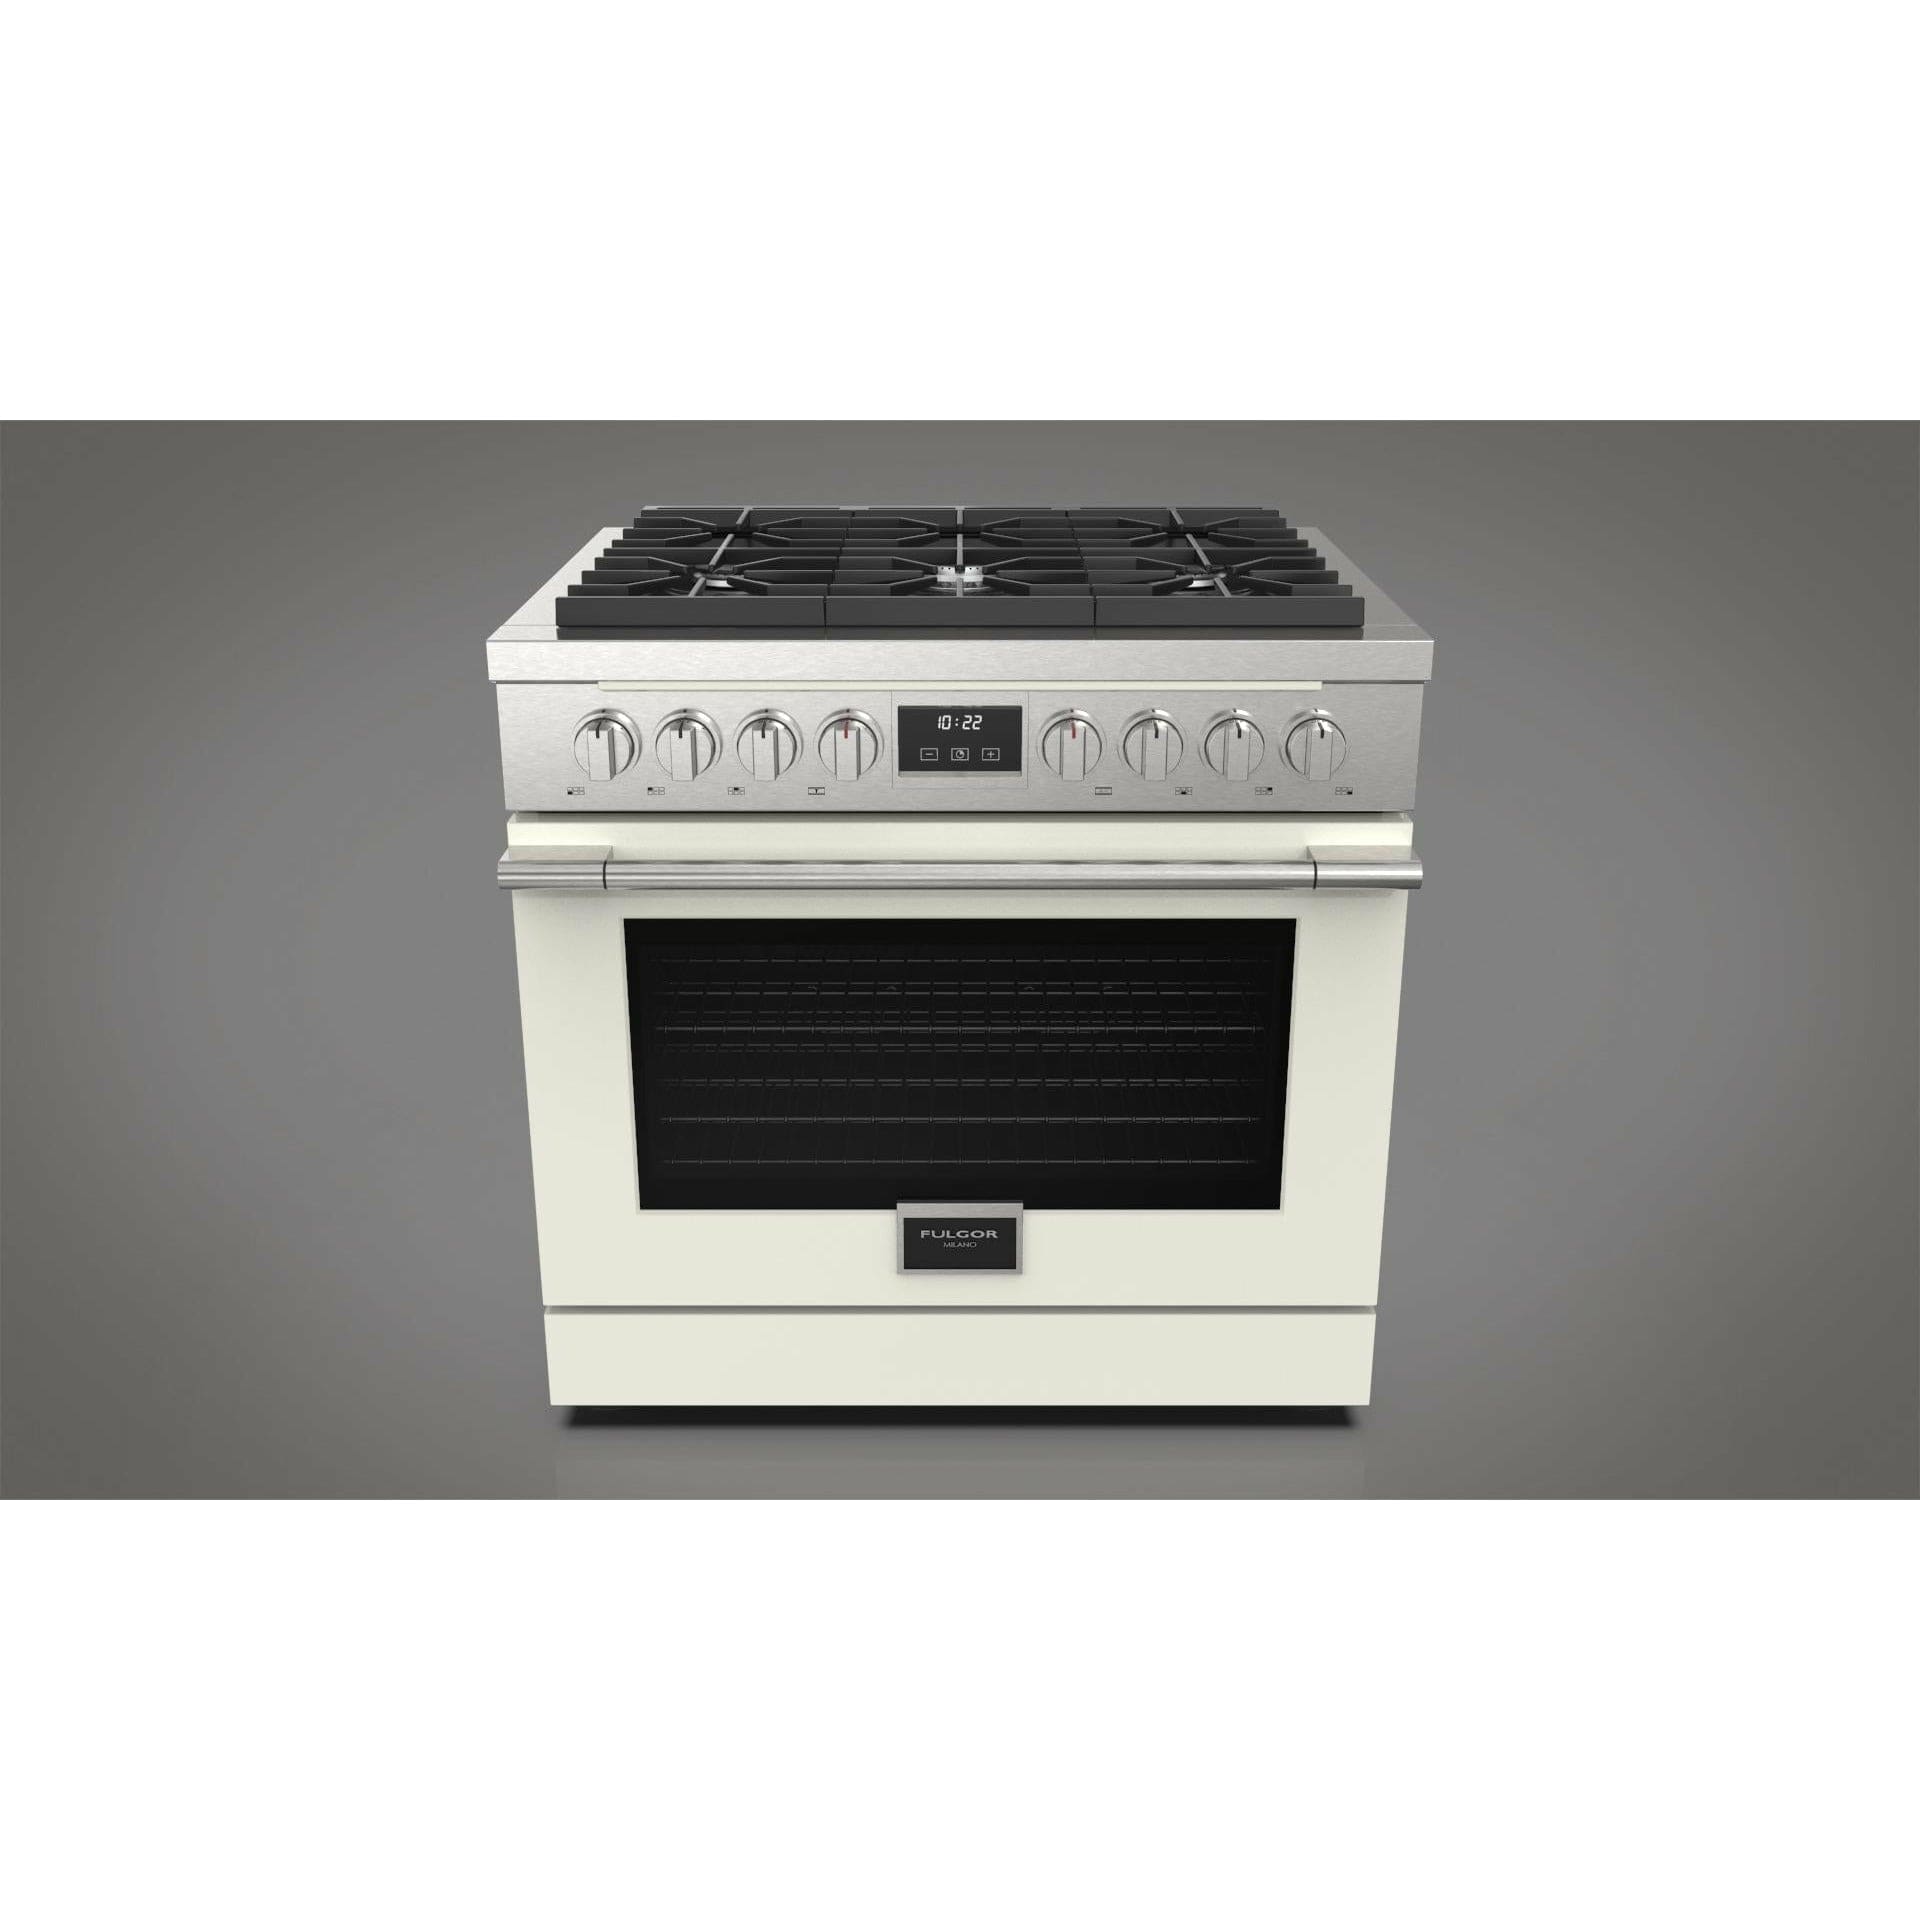 Fulgor Milano 36" Freestanding All Gas Range with 3 Duel Flame Burners, Stainless Steel - F4PGR366S2 Ranges ACDKIT36MW Luxury Appliances Direct